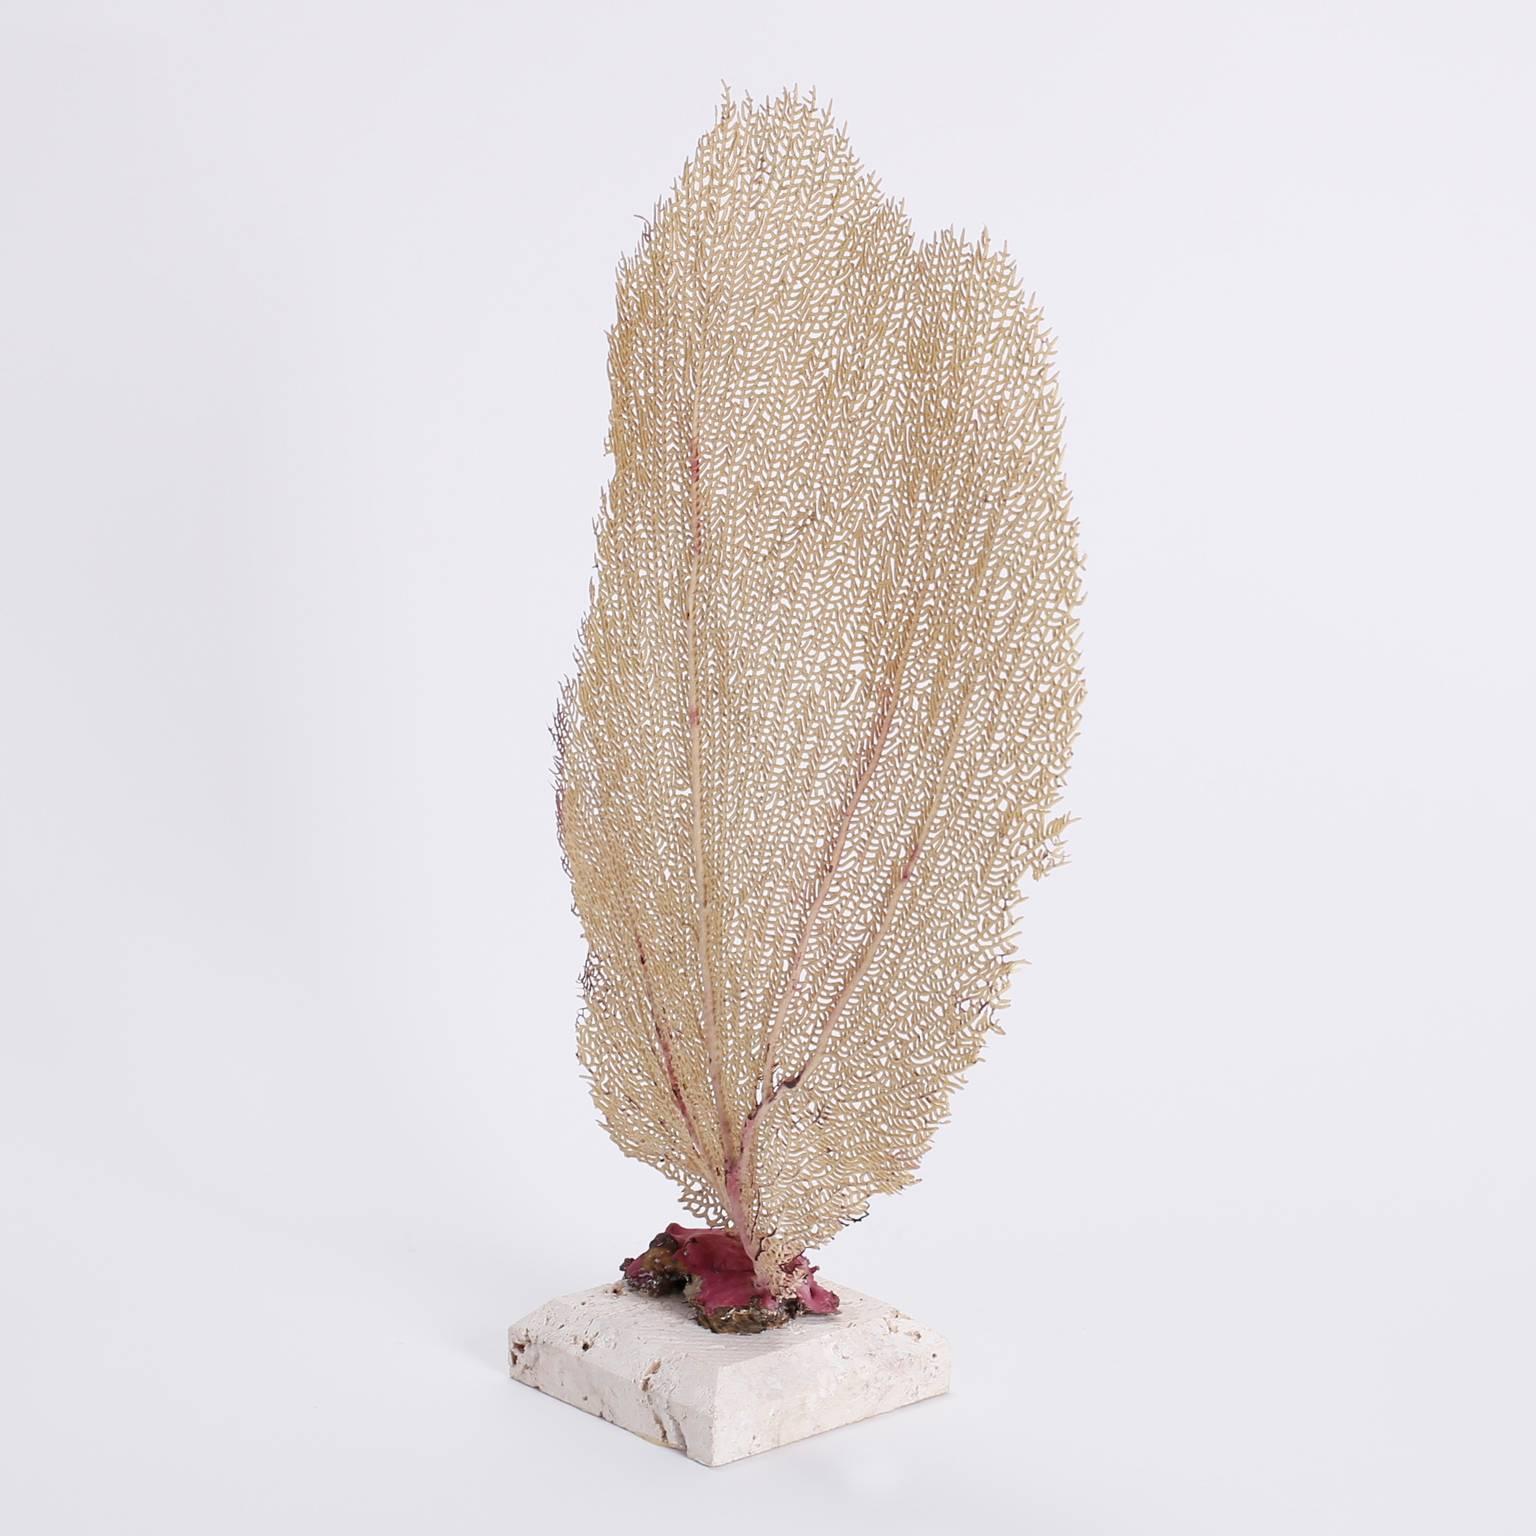 Yellow sea fan with an intricate web of branches and a vibrant red root. Presented on a coquina base to enhance the organic qualities.